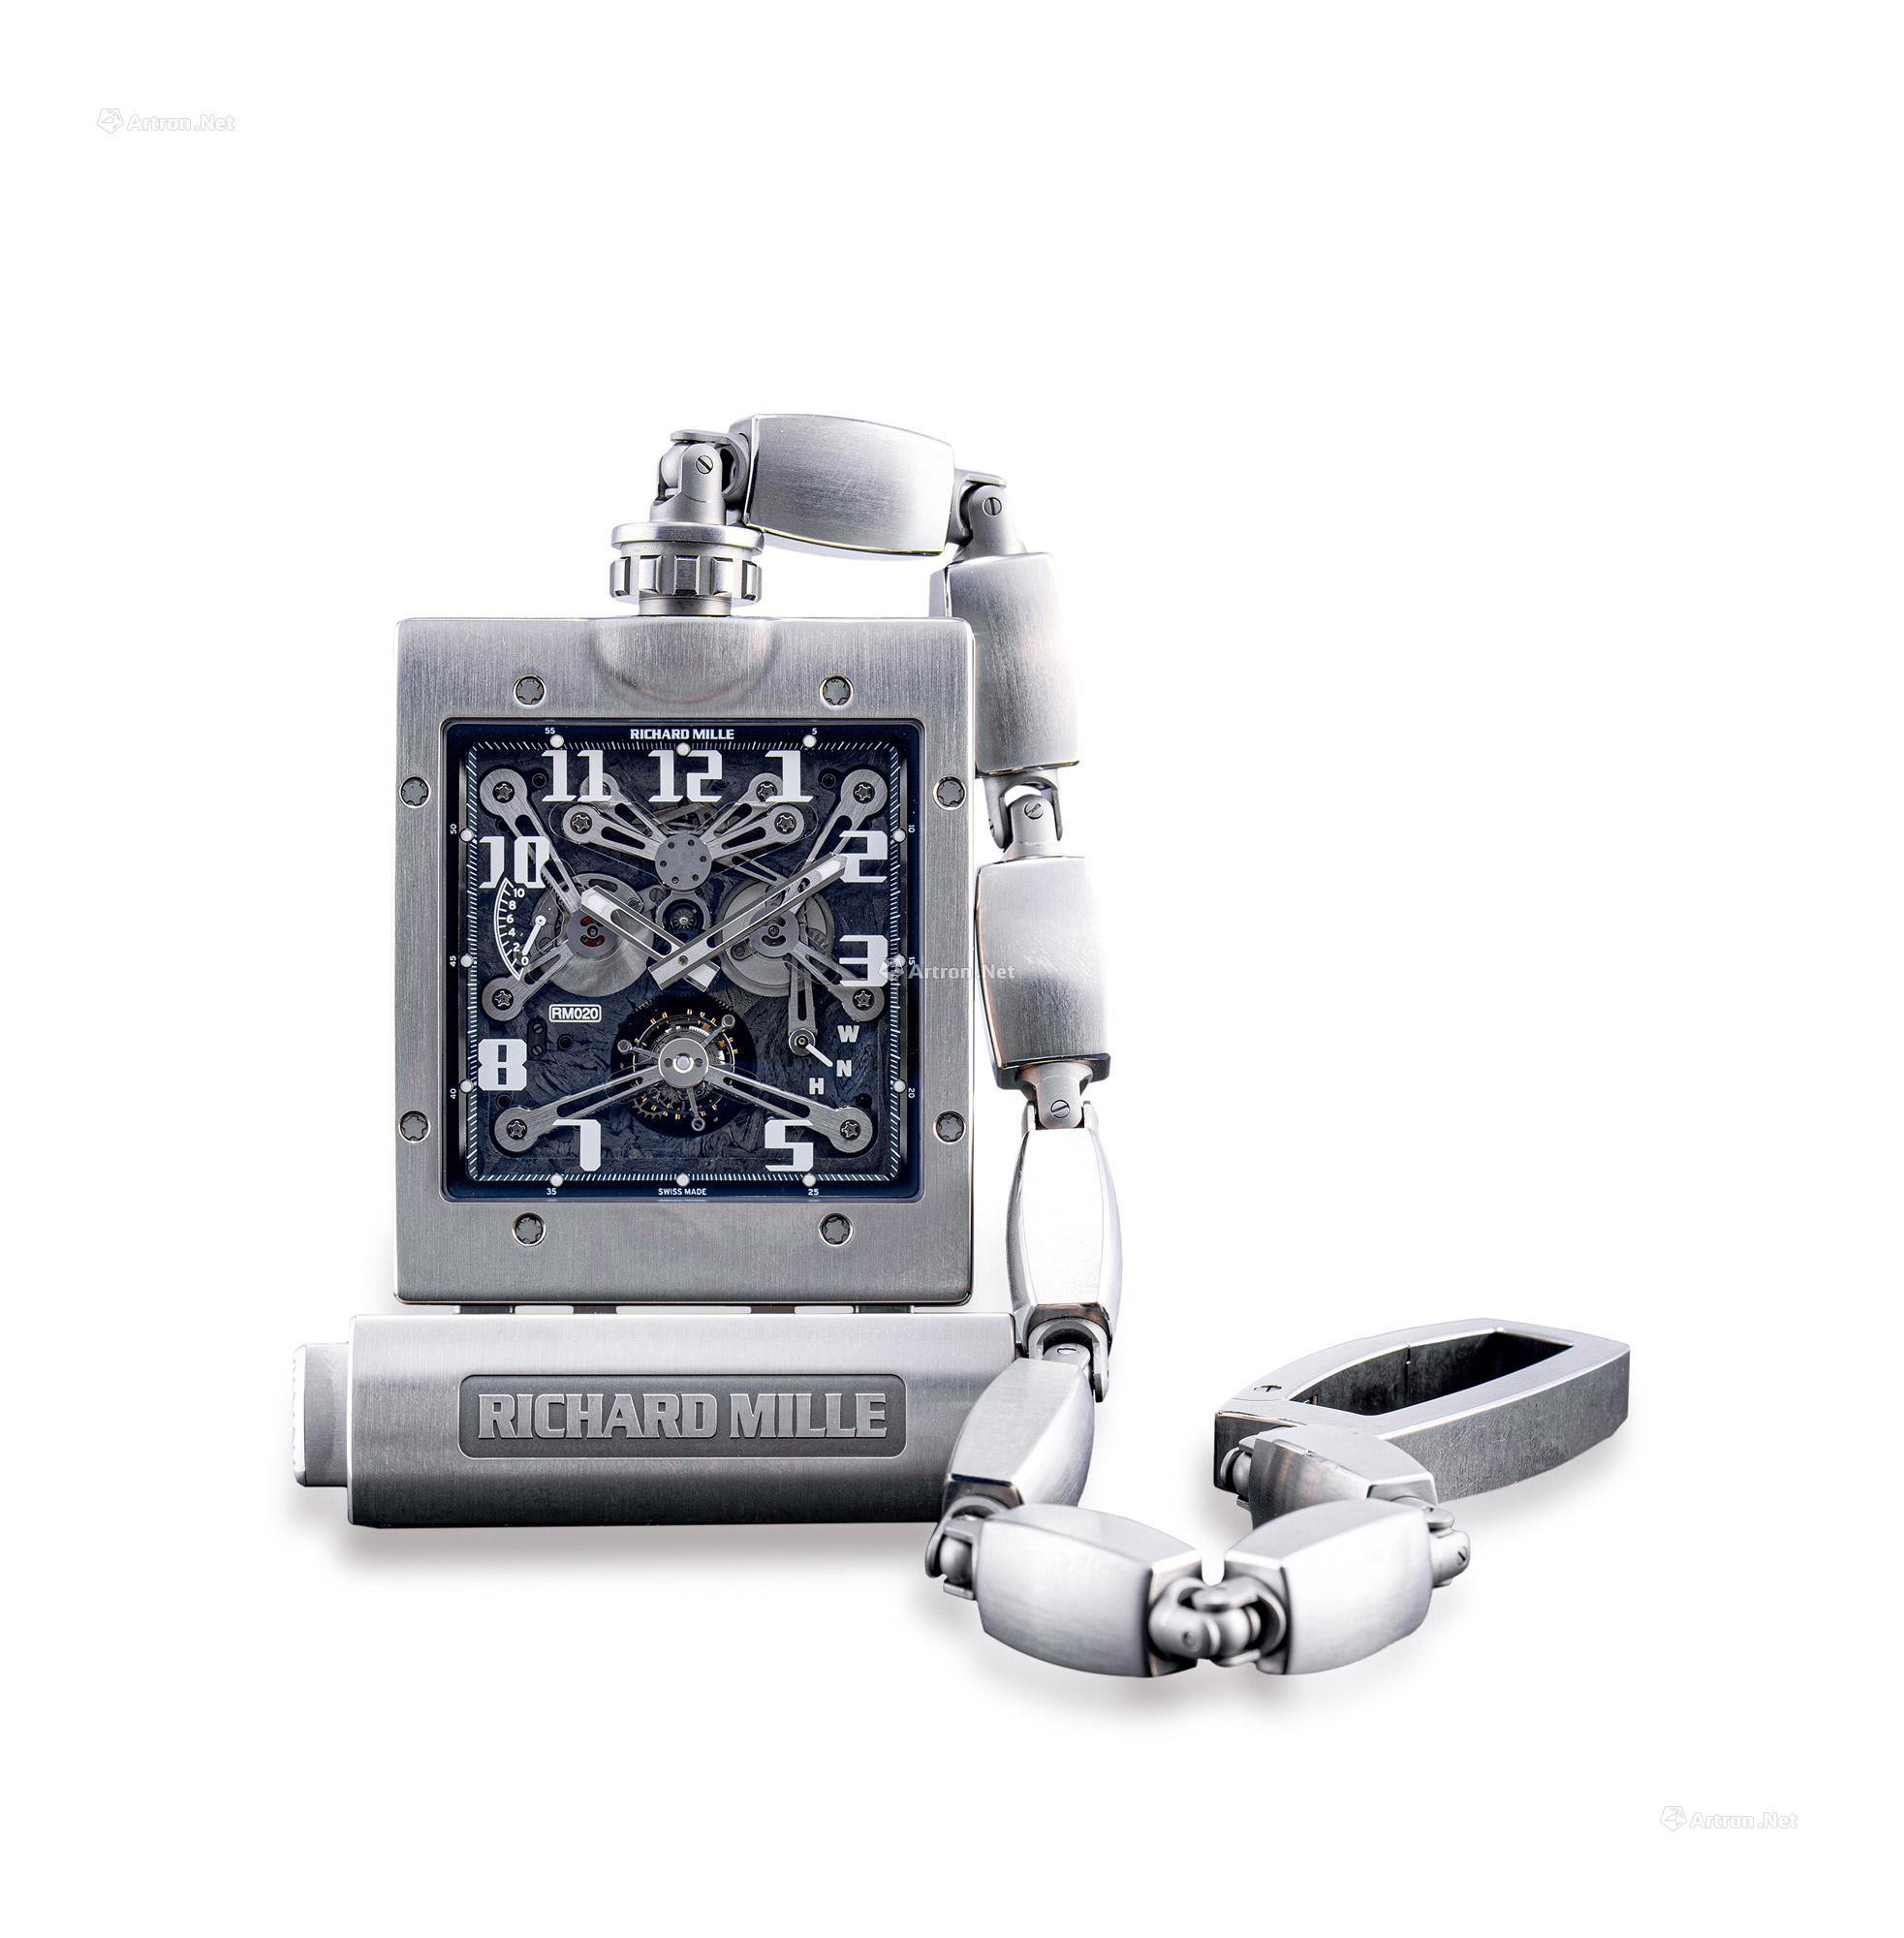 RICHARD MILLE  A RARE AND FINE TITANIUM OPEN-FACED TOURBILLON MECHANICAL POCKET WATCH AND TABLE CLOCK， WITH 10 DAYS POWER RESERVE INDICATOR， CERTIFICATE OF ORIGIN AND PRESENTATION BOX